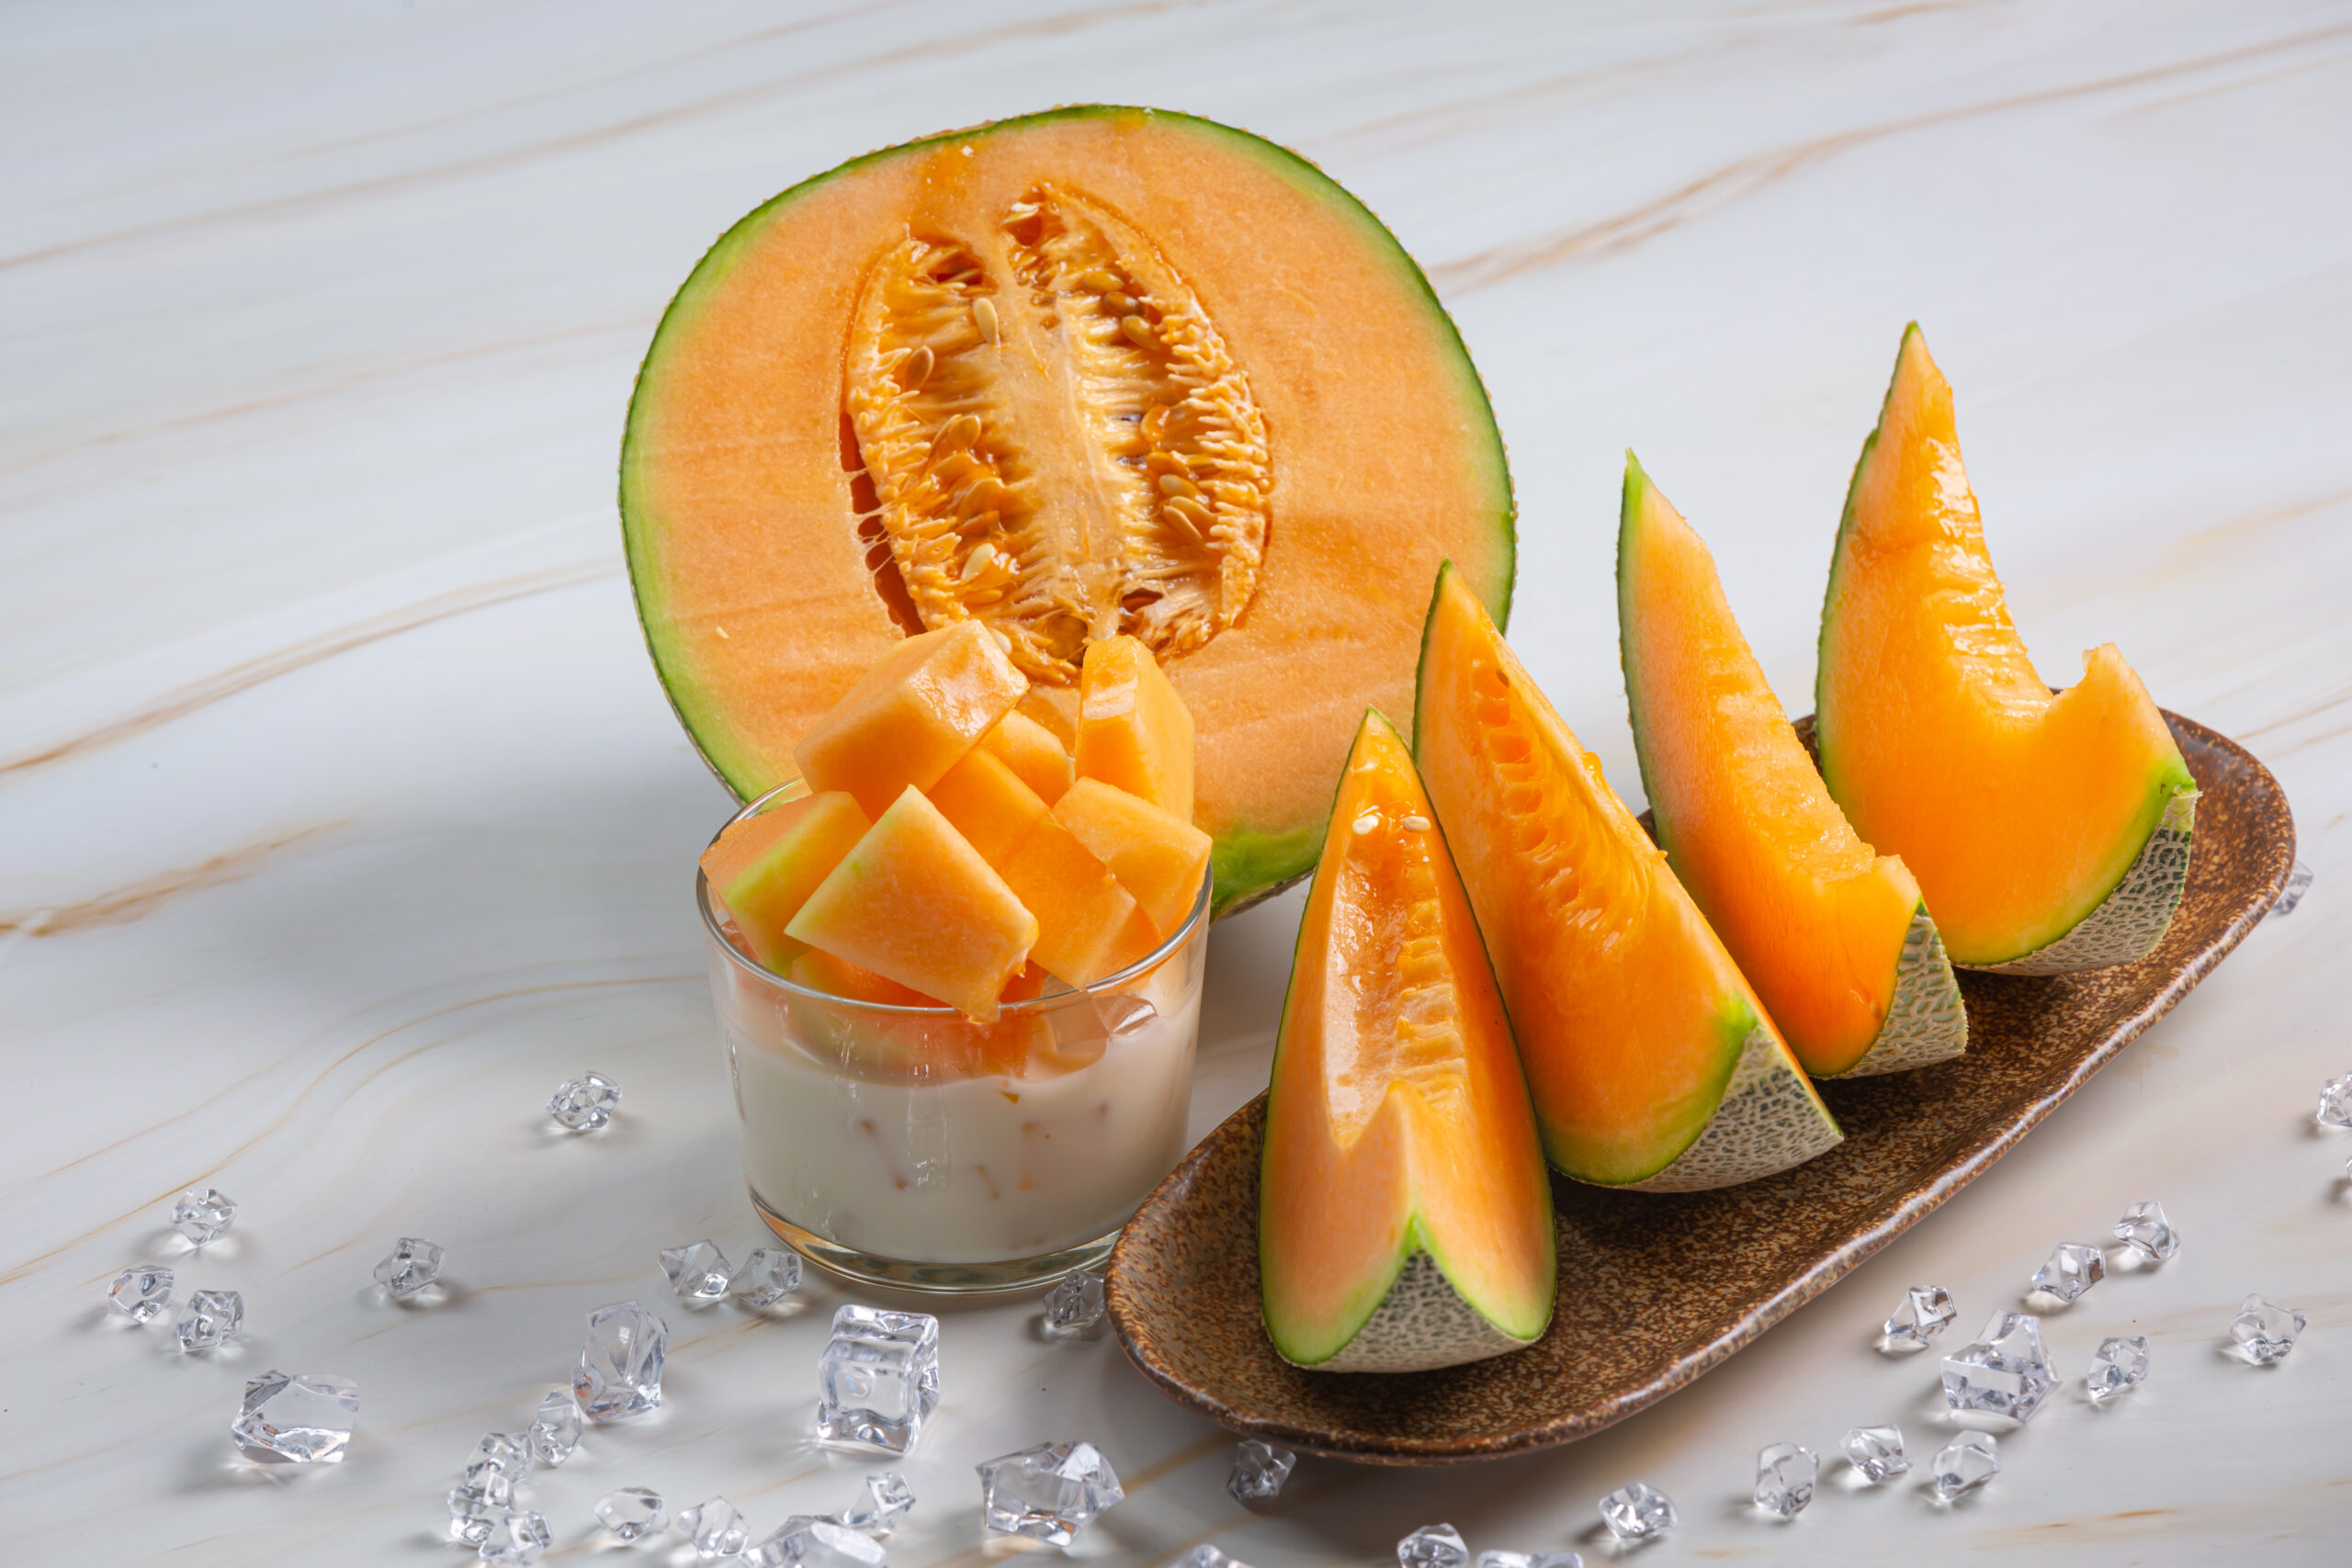 Cantaloupes, a delicious and refreshing fruit, have recently been associated with a multistate outbreak of Salmonella infections